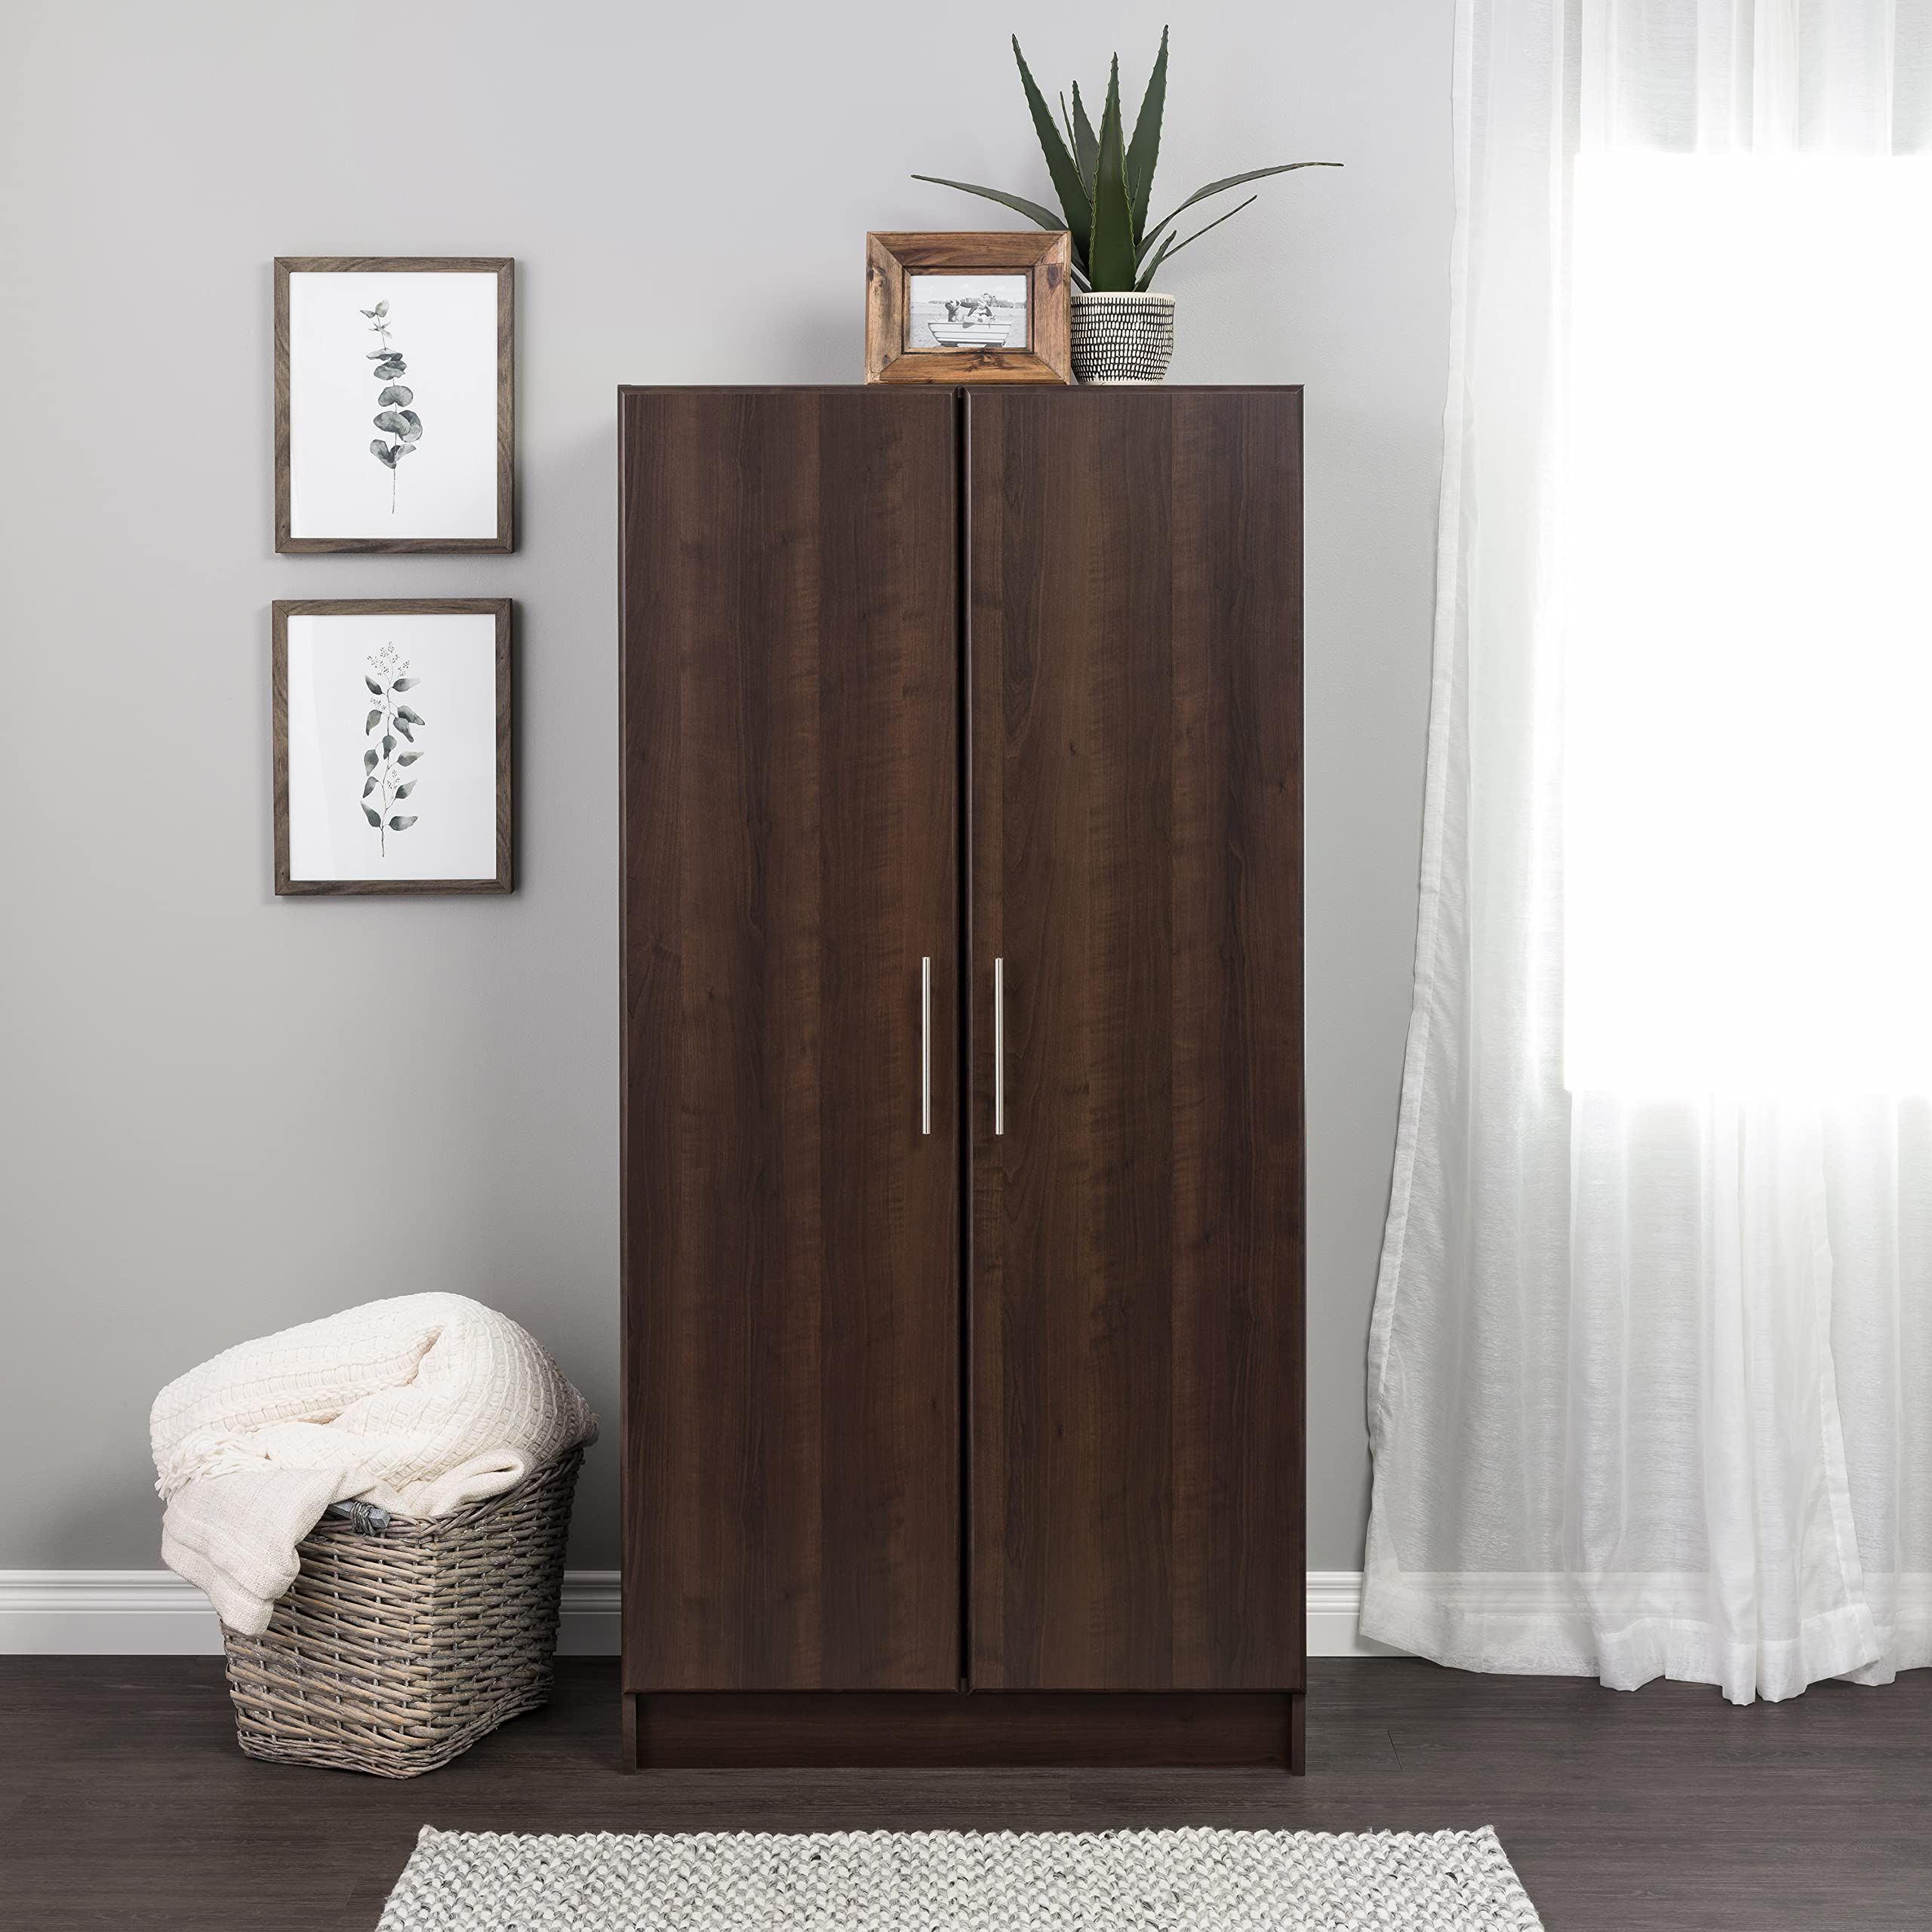 Espresso Wardrobes With Trendy Amazon: Prepac Elite Functional Wardrobe Closet With Hanging Rail And  Shelves, Simplistic 2 Door Armoire Portable Closet 21" D X 32" W X 65" H,  Espresso, Eesw 3264 K : Home & Kitchen (Photo 2 of 10)